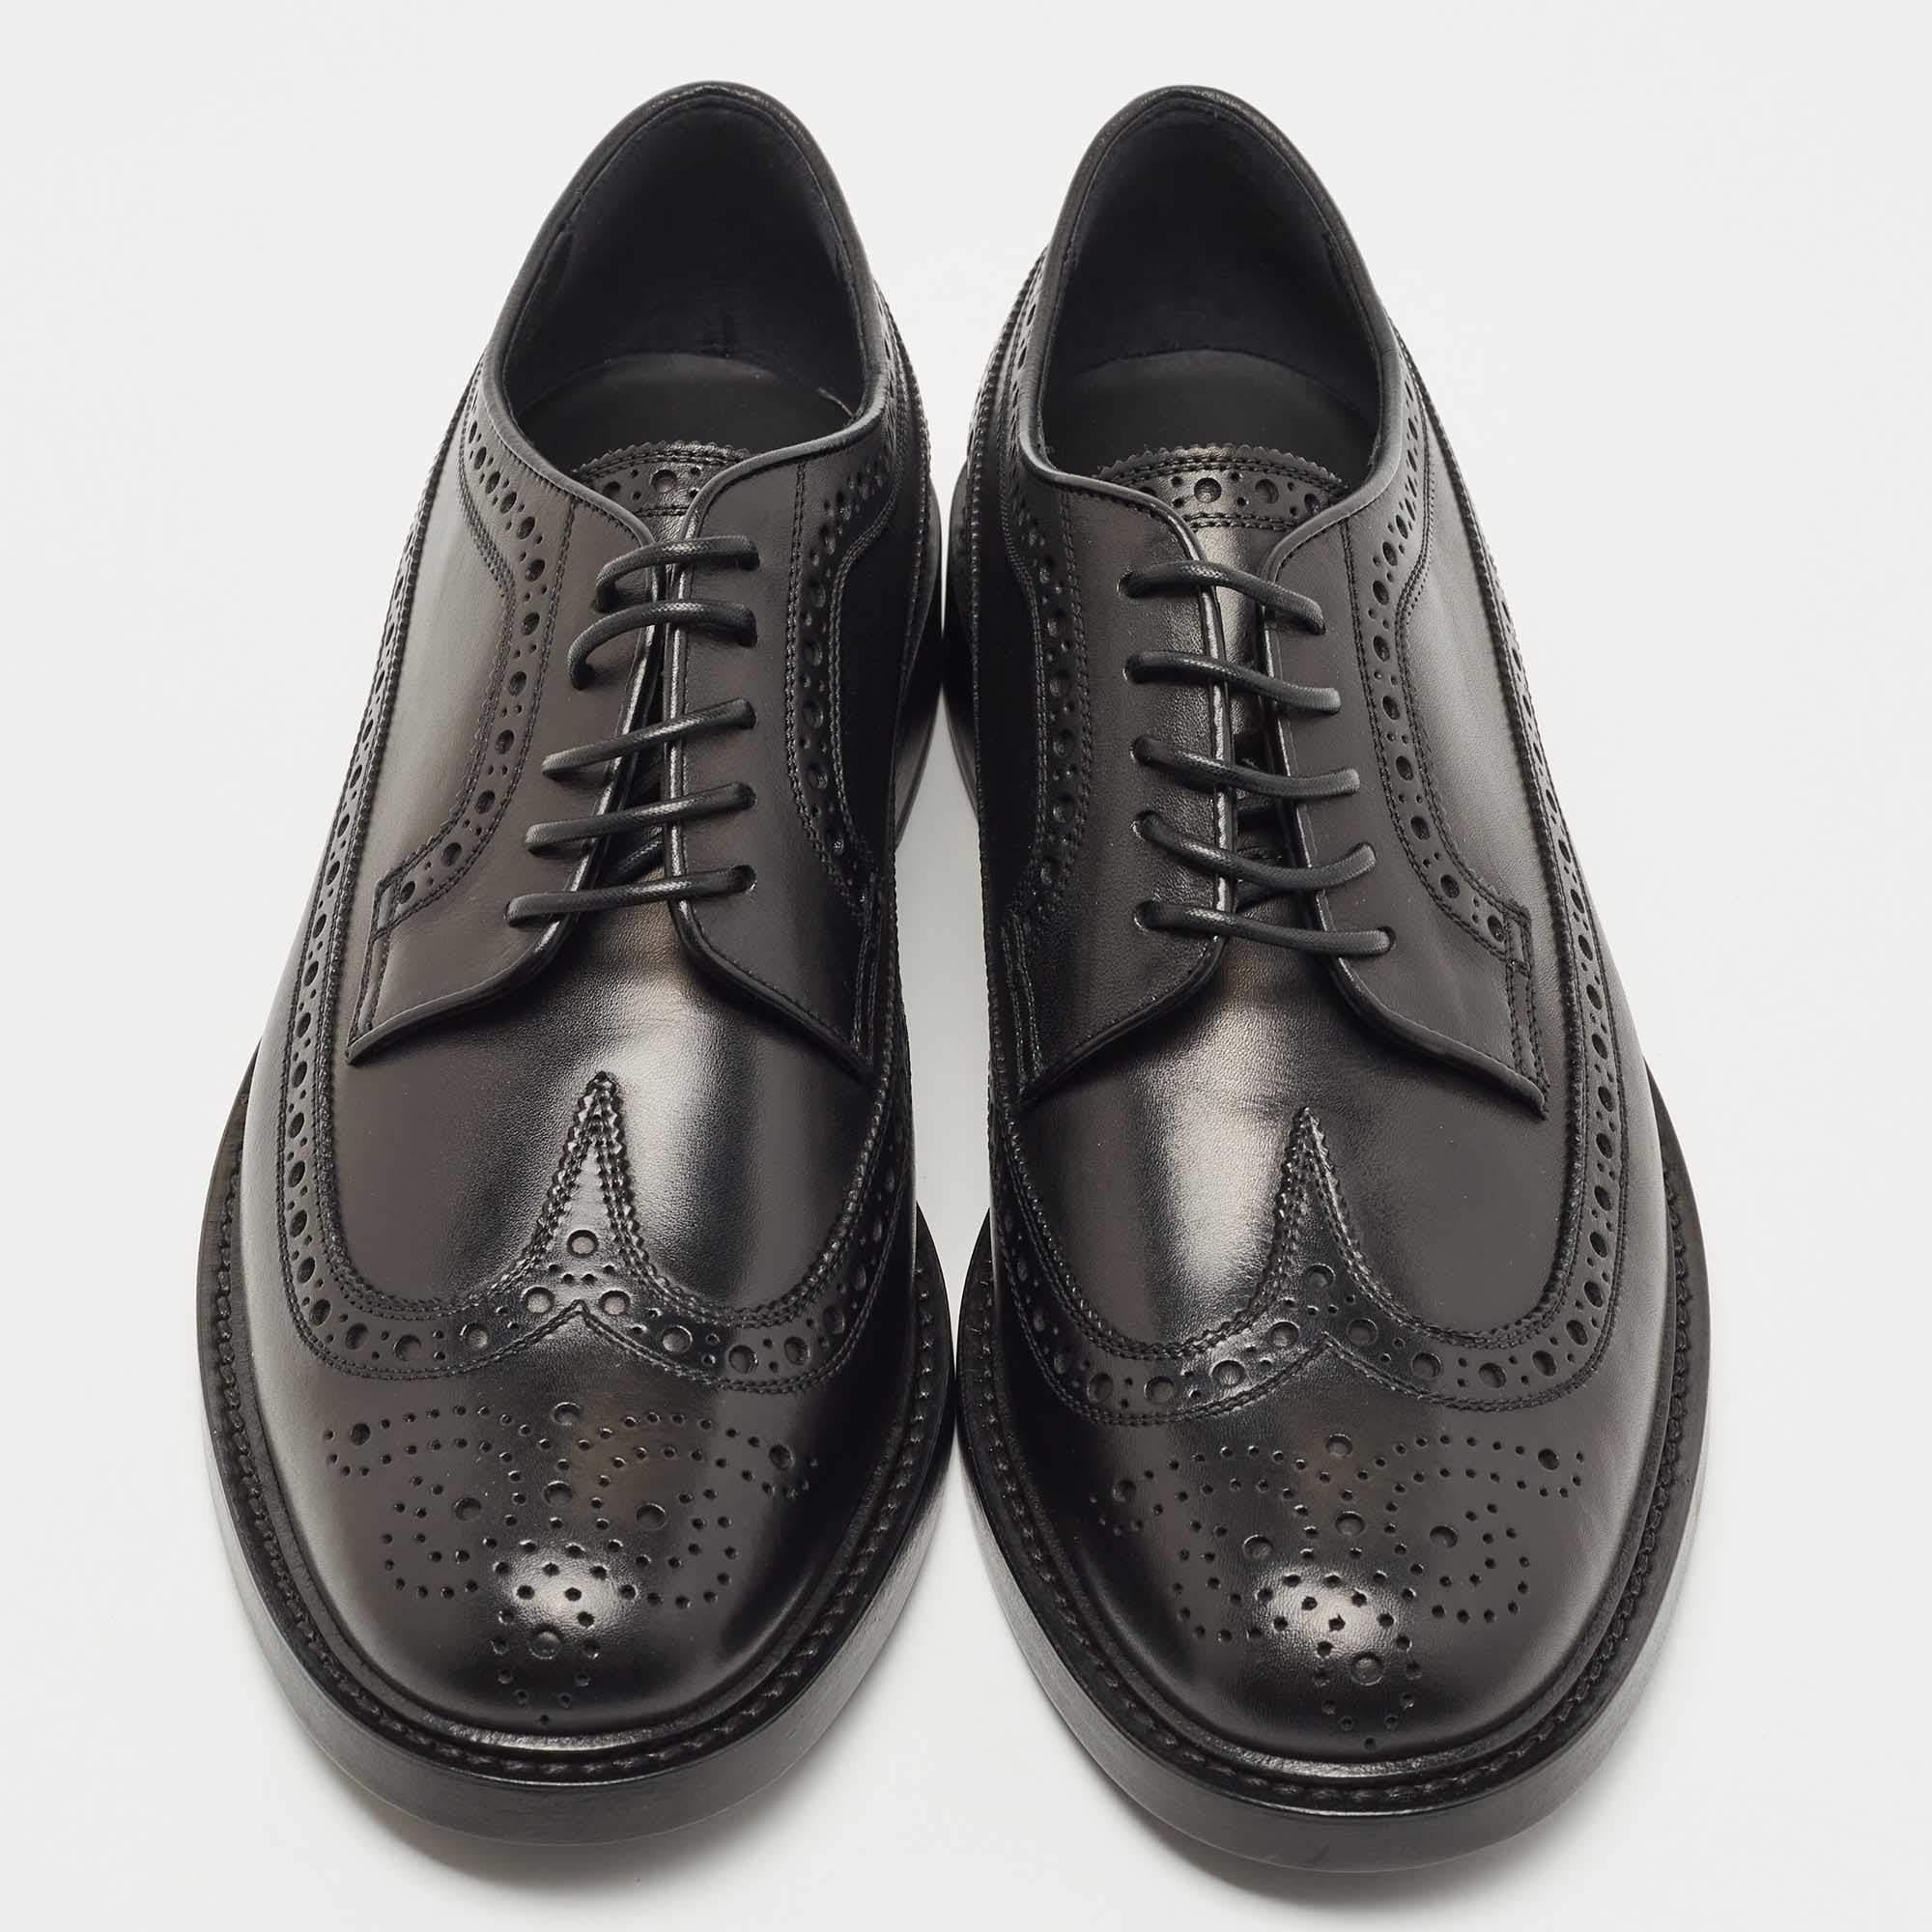 A perfect combination of classy and refined style, these stunning Burberry oxfords are a must-have for men who don't shy from flaunting something exclusive. Constructed in leather, these shoes feature brogue details and lace-up on the vamps to